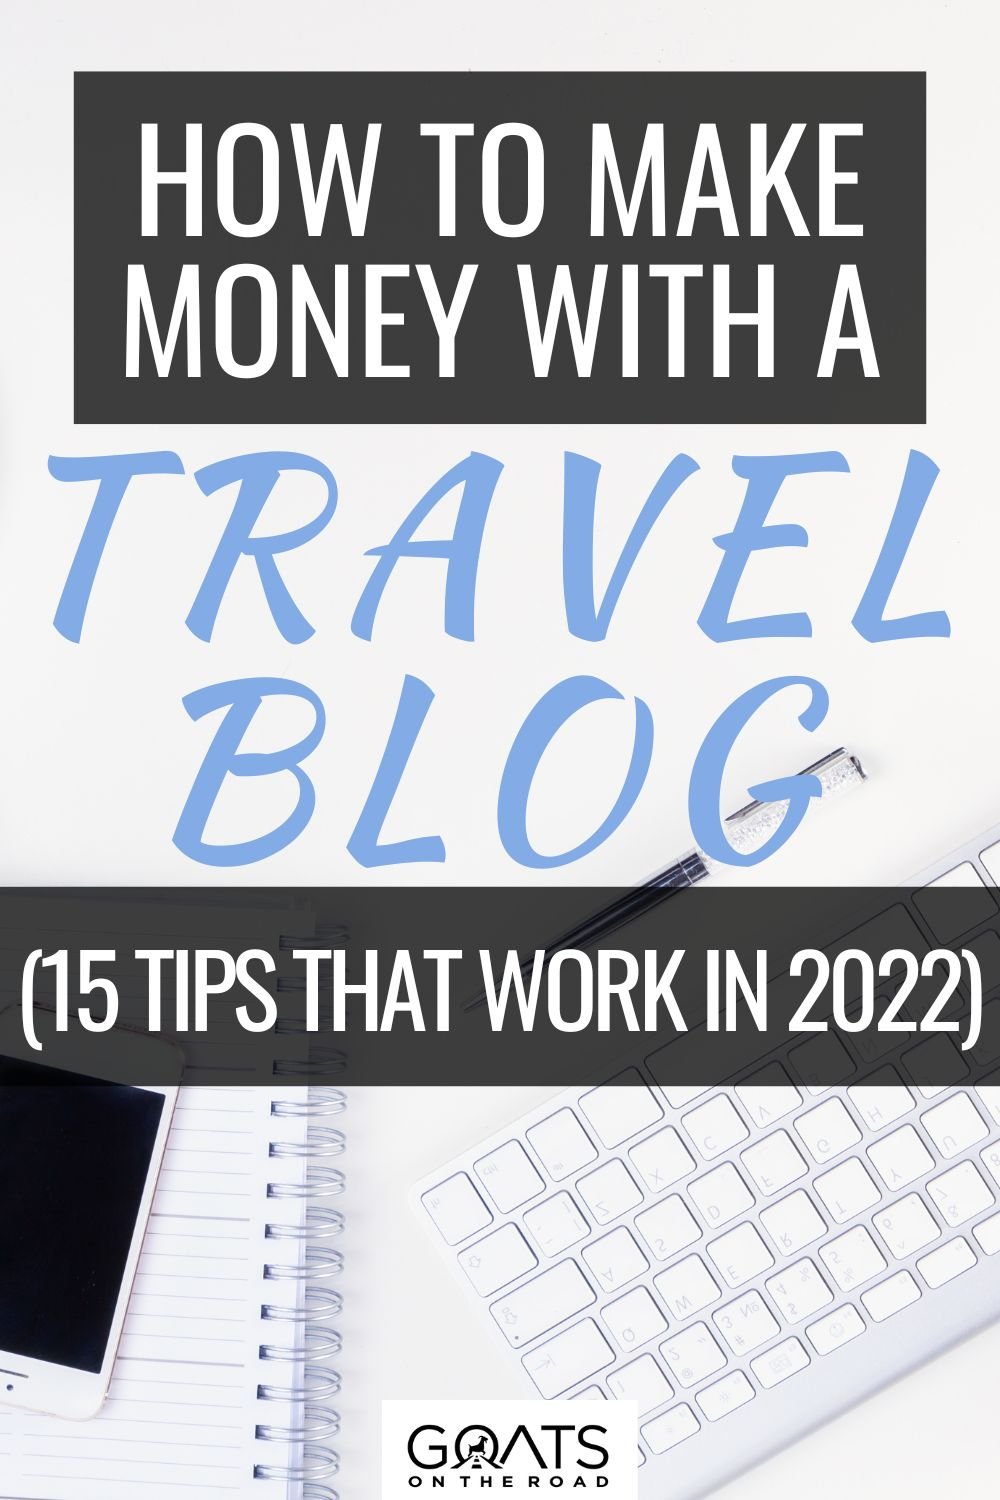 How To Make Money With a Travel Blog (15 Tips That Work in 2022)